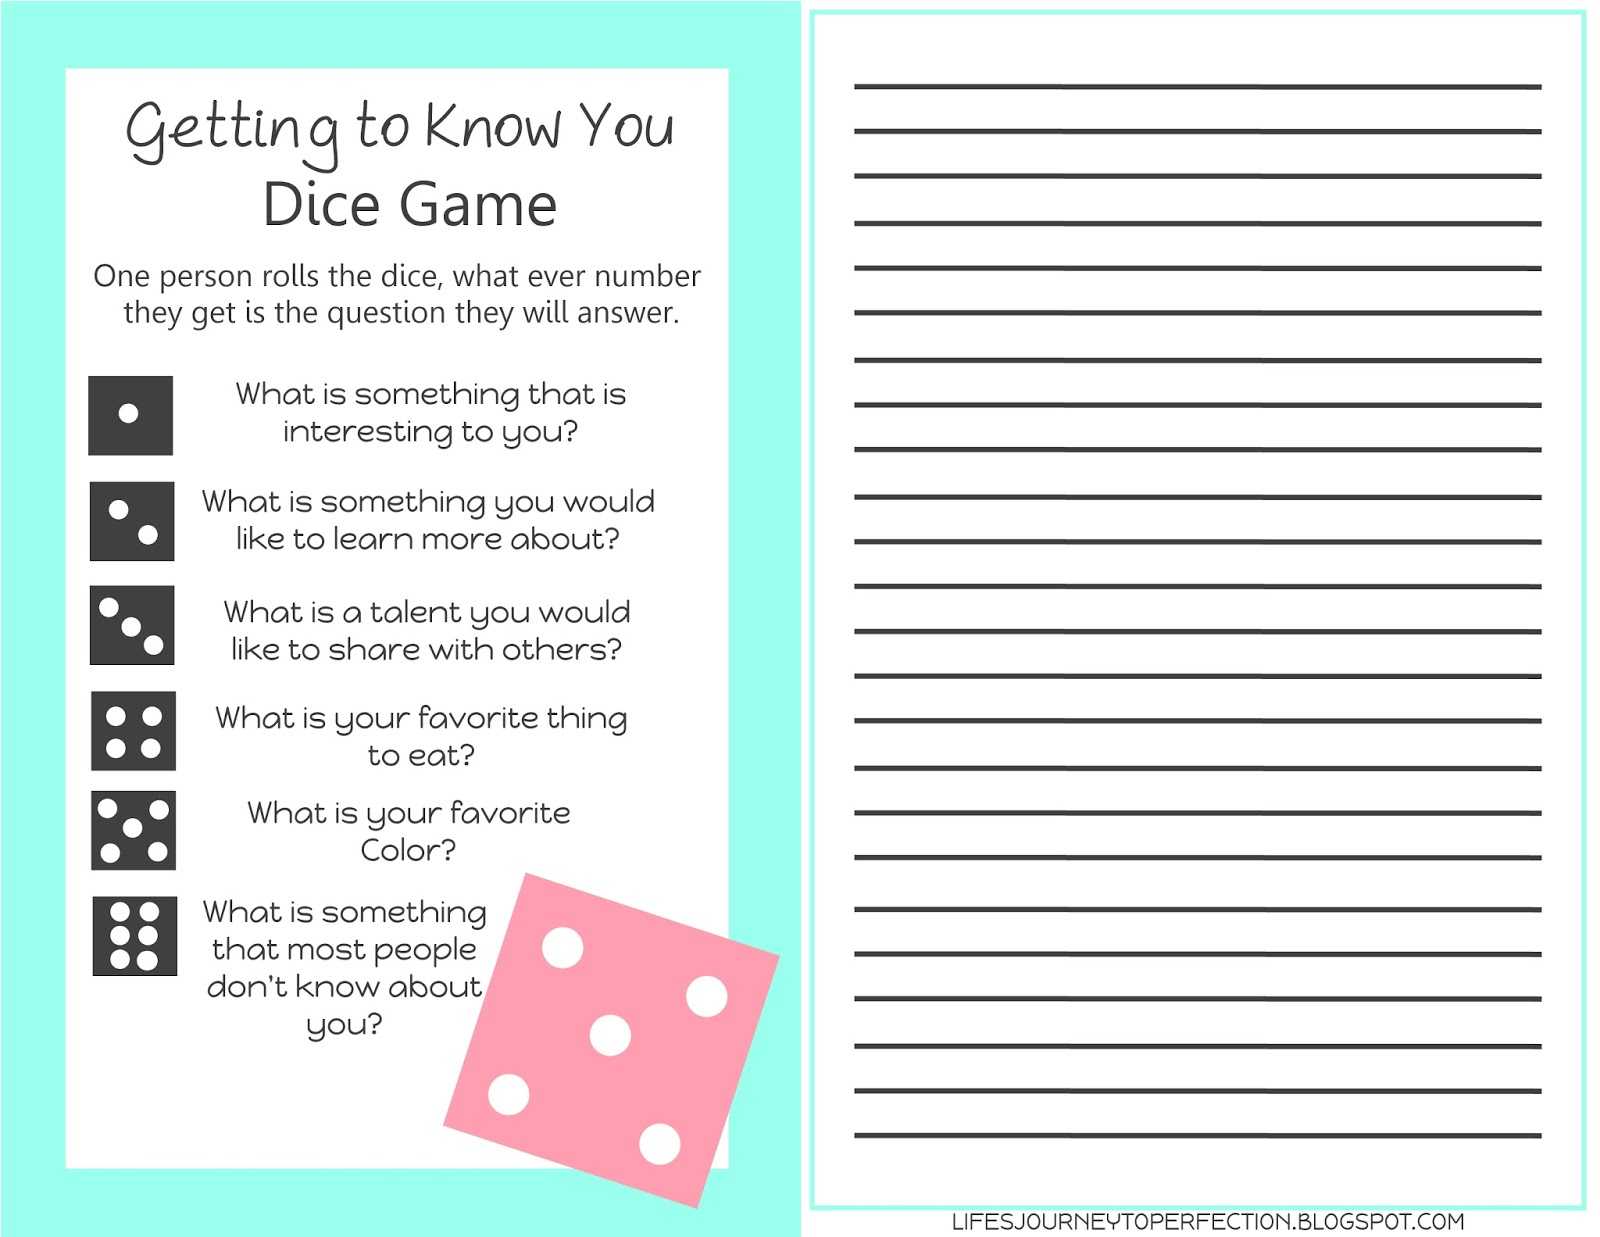 Life Plan Worksheet Along with Life S Journey to Perfection Getting to Know You Dice